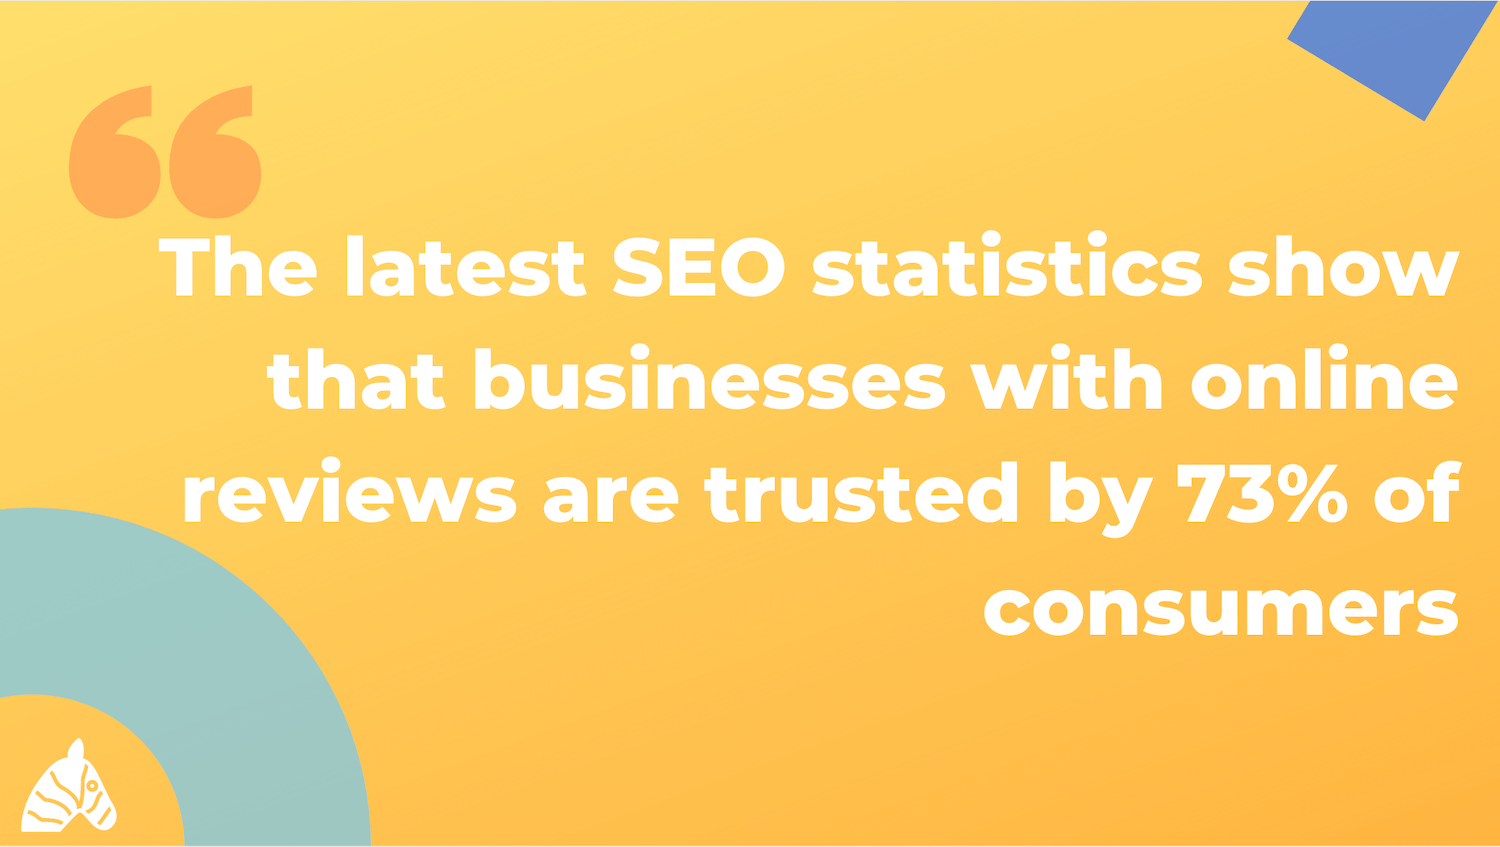 online reviews and SEO statistic